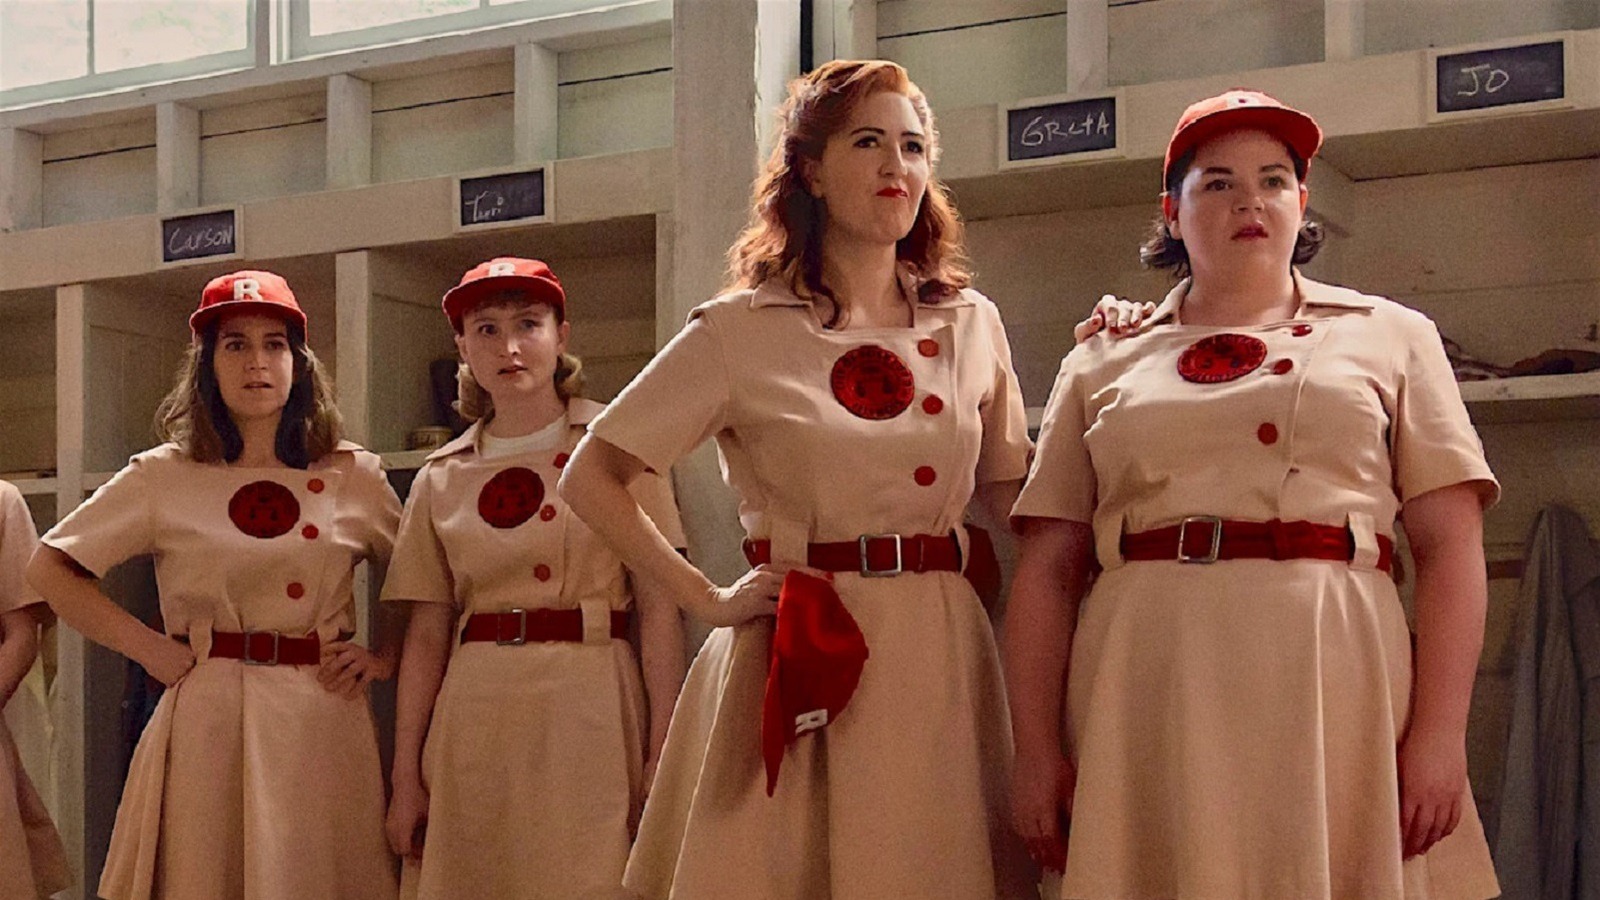 How Marla Hooch stole the show in 'A League of Their Own' and